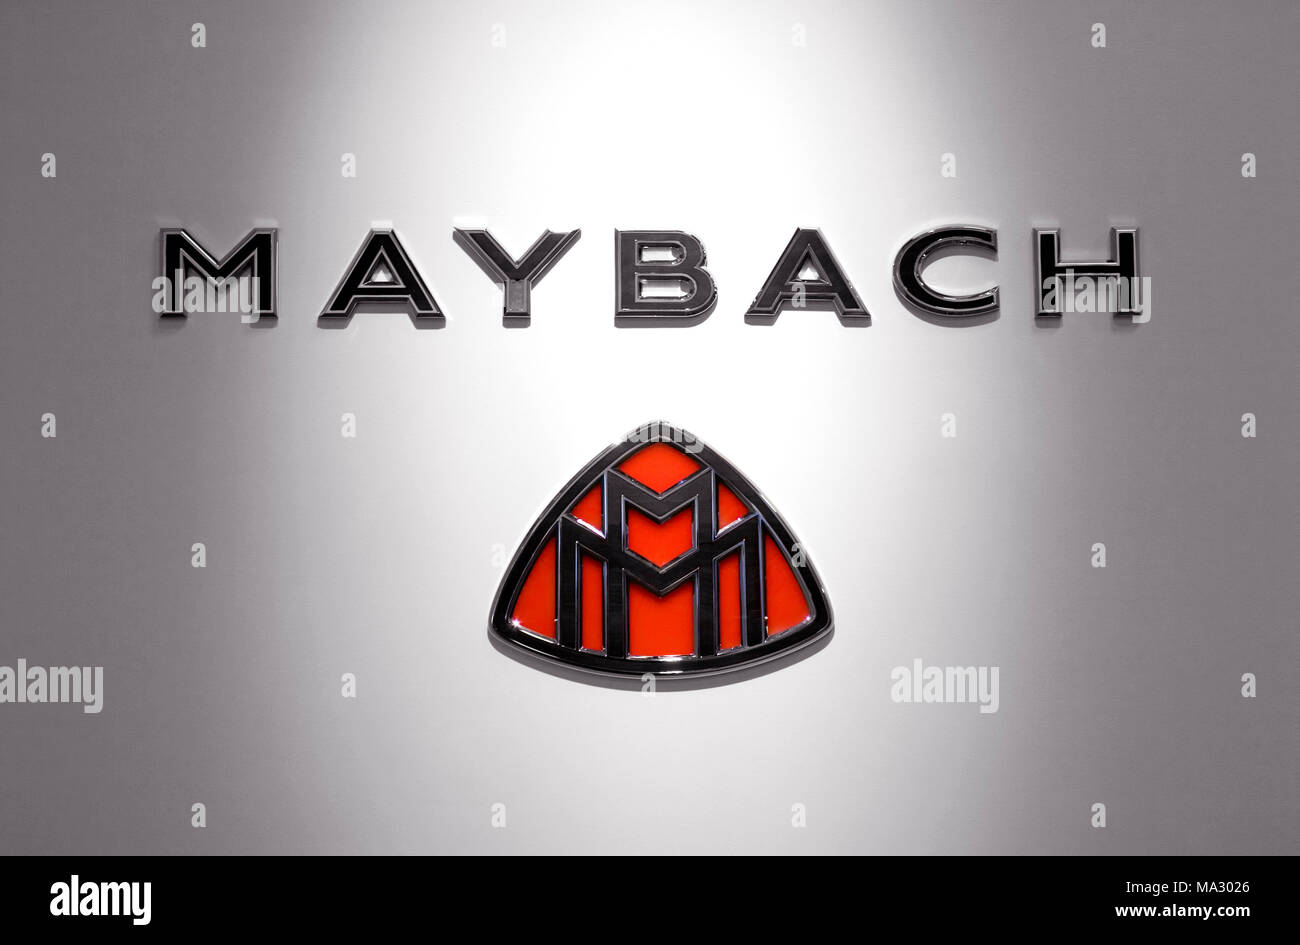 Maybach automobiles badge logo and branding. Maybach is a sub-brand of Mercedes and is focussed on luxury cars. Stock Photo